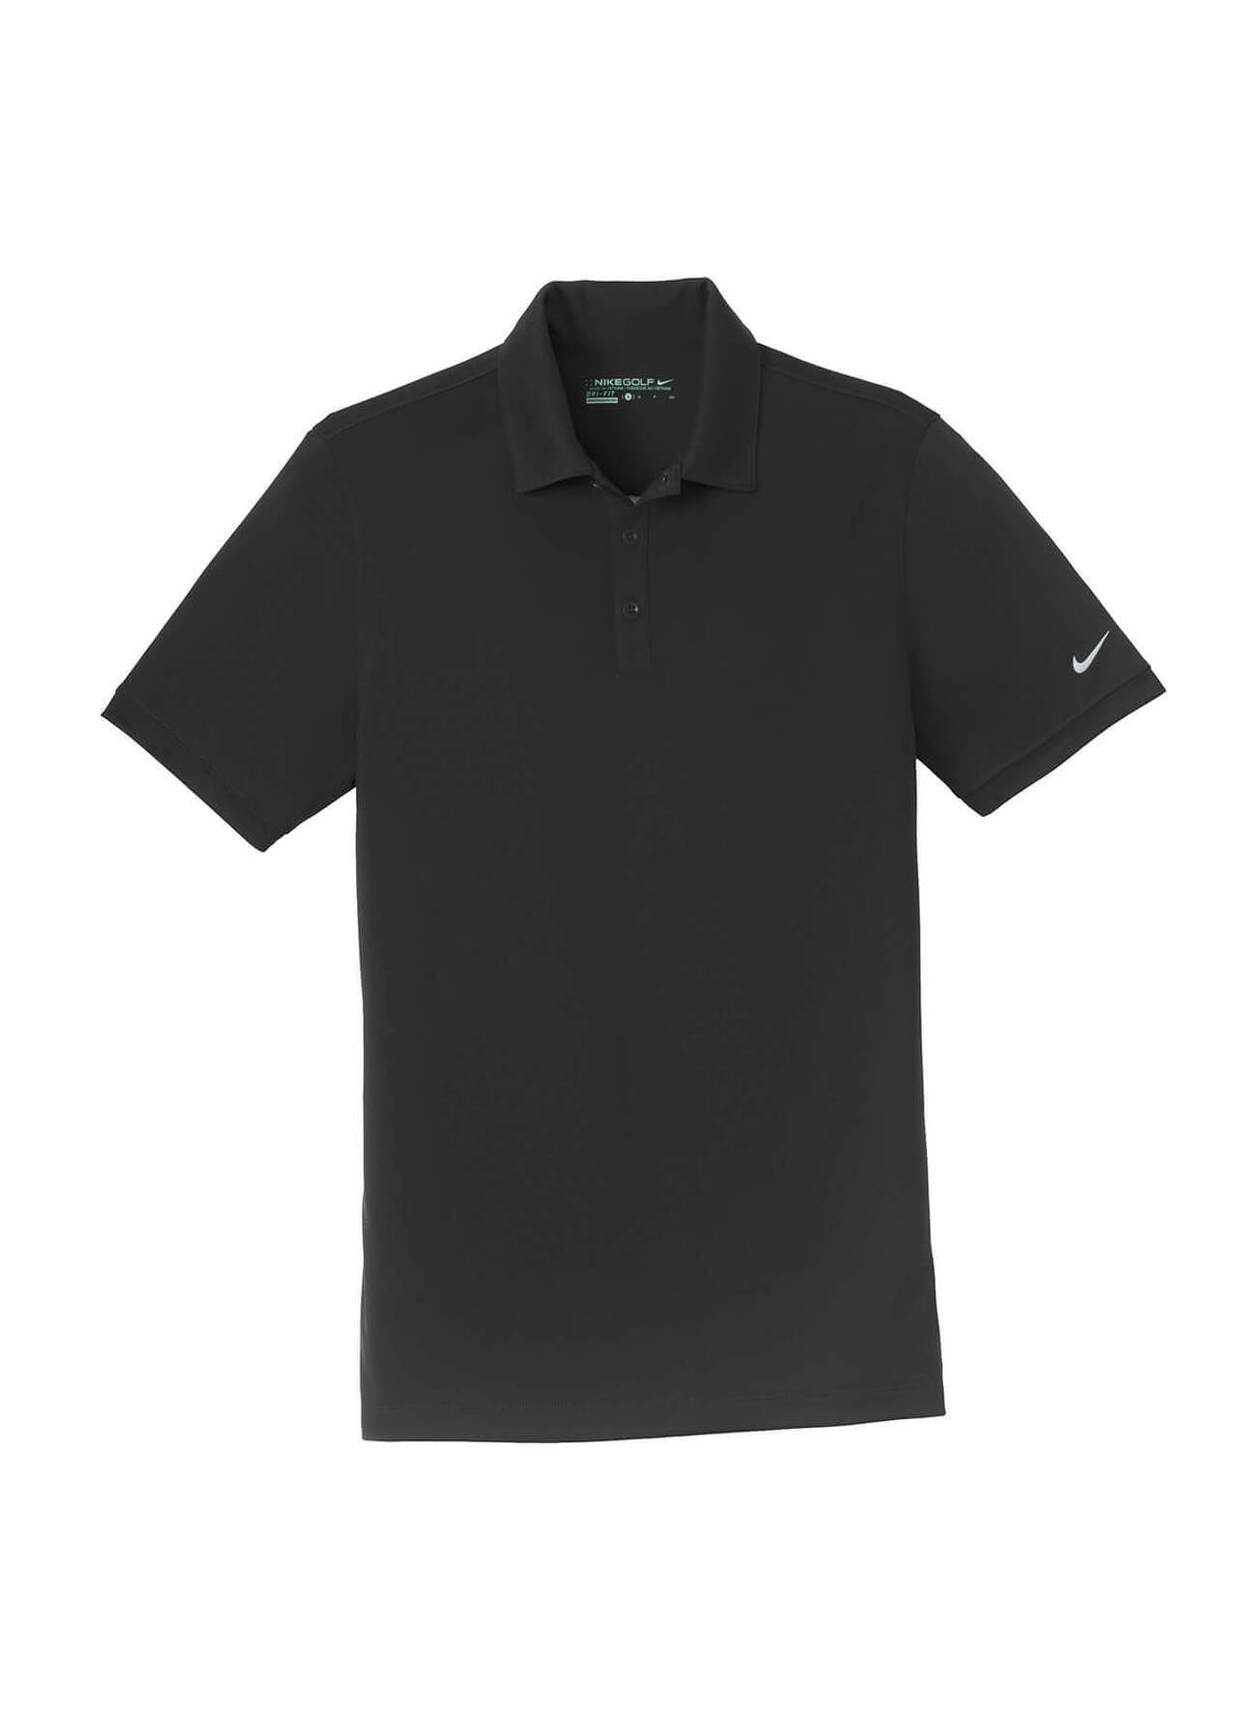 Embroidered Nike Men's Black Dri-FIT Players Modern Fit Polo | Custom Polo